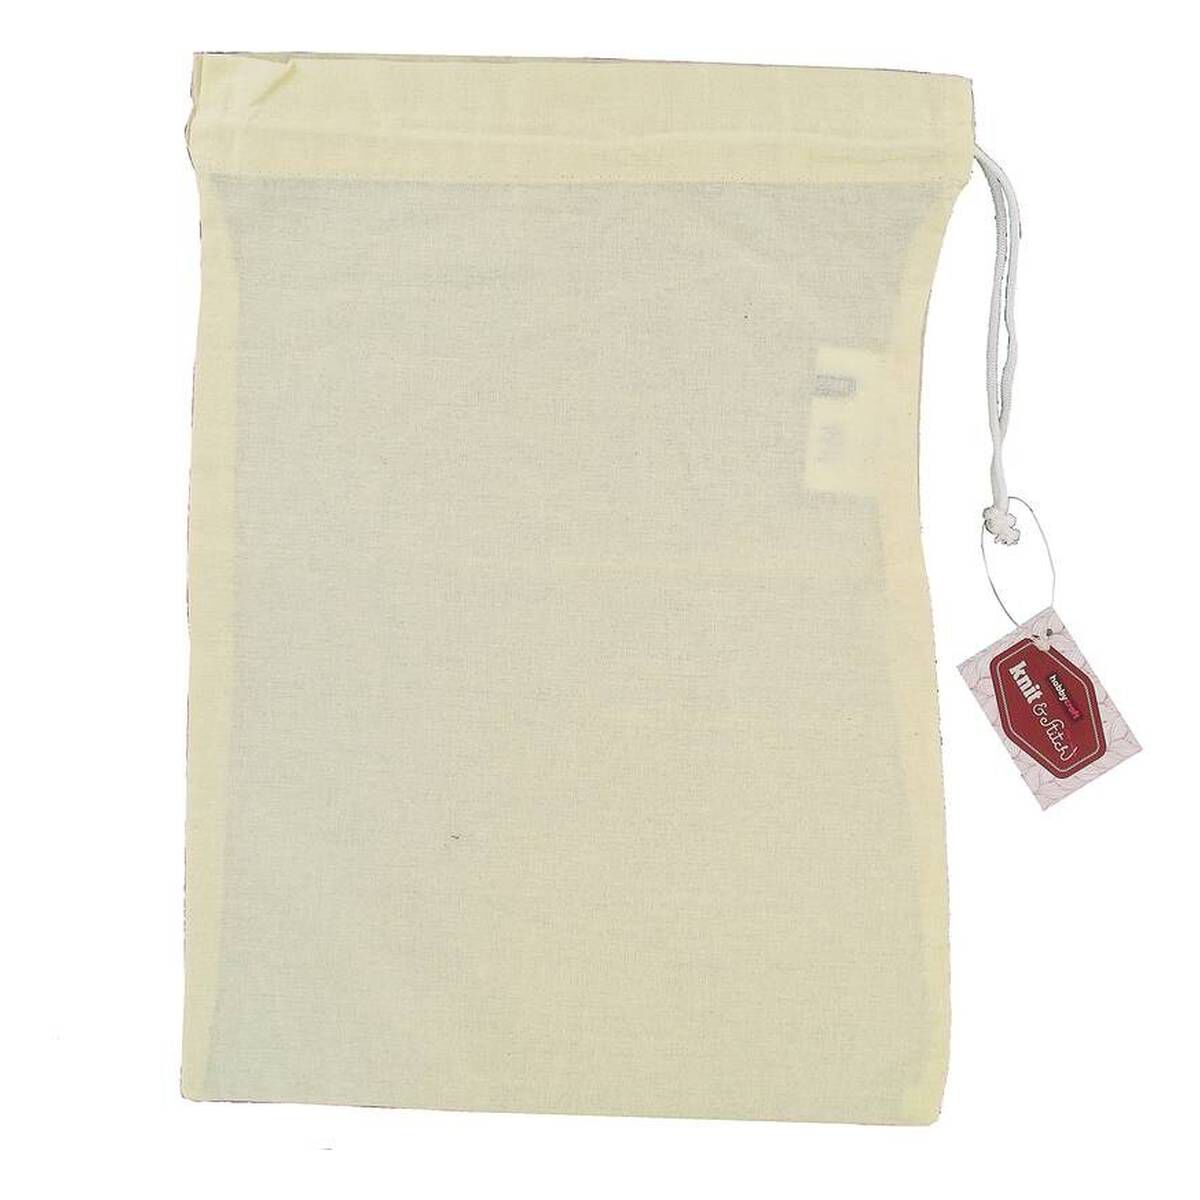 Small Plain Cotton Bag With Handles Sewing & Knitting Small